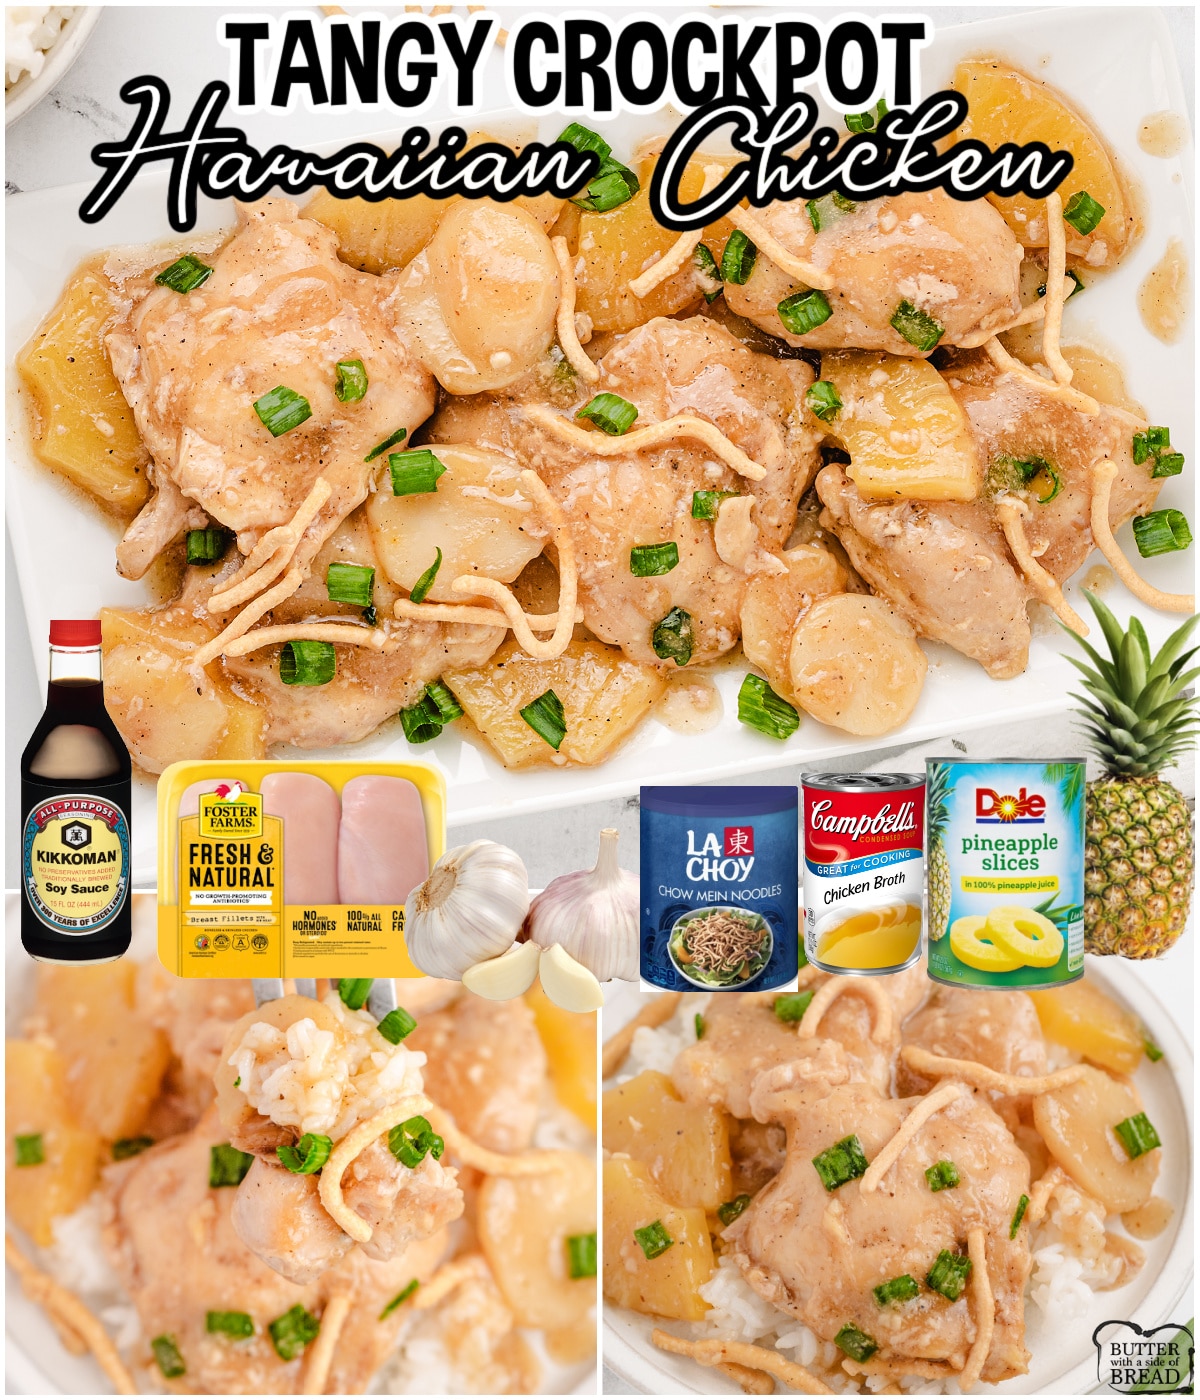 Sweet Hawaiian Crockpot Chicken is made with tender chicken & pineapple slow cooked in a savory sauce that's perfect topped with chow mein noodles! Flavorful chicken dinner everyone loves!